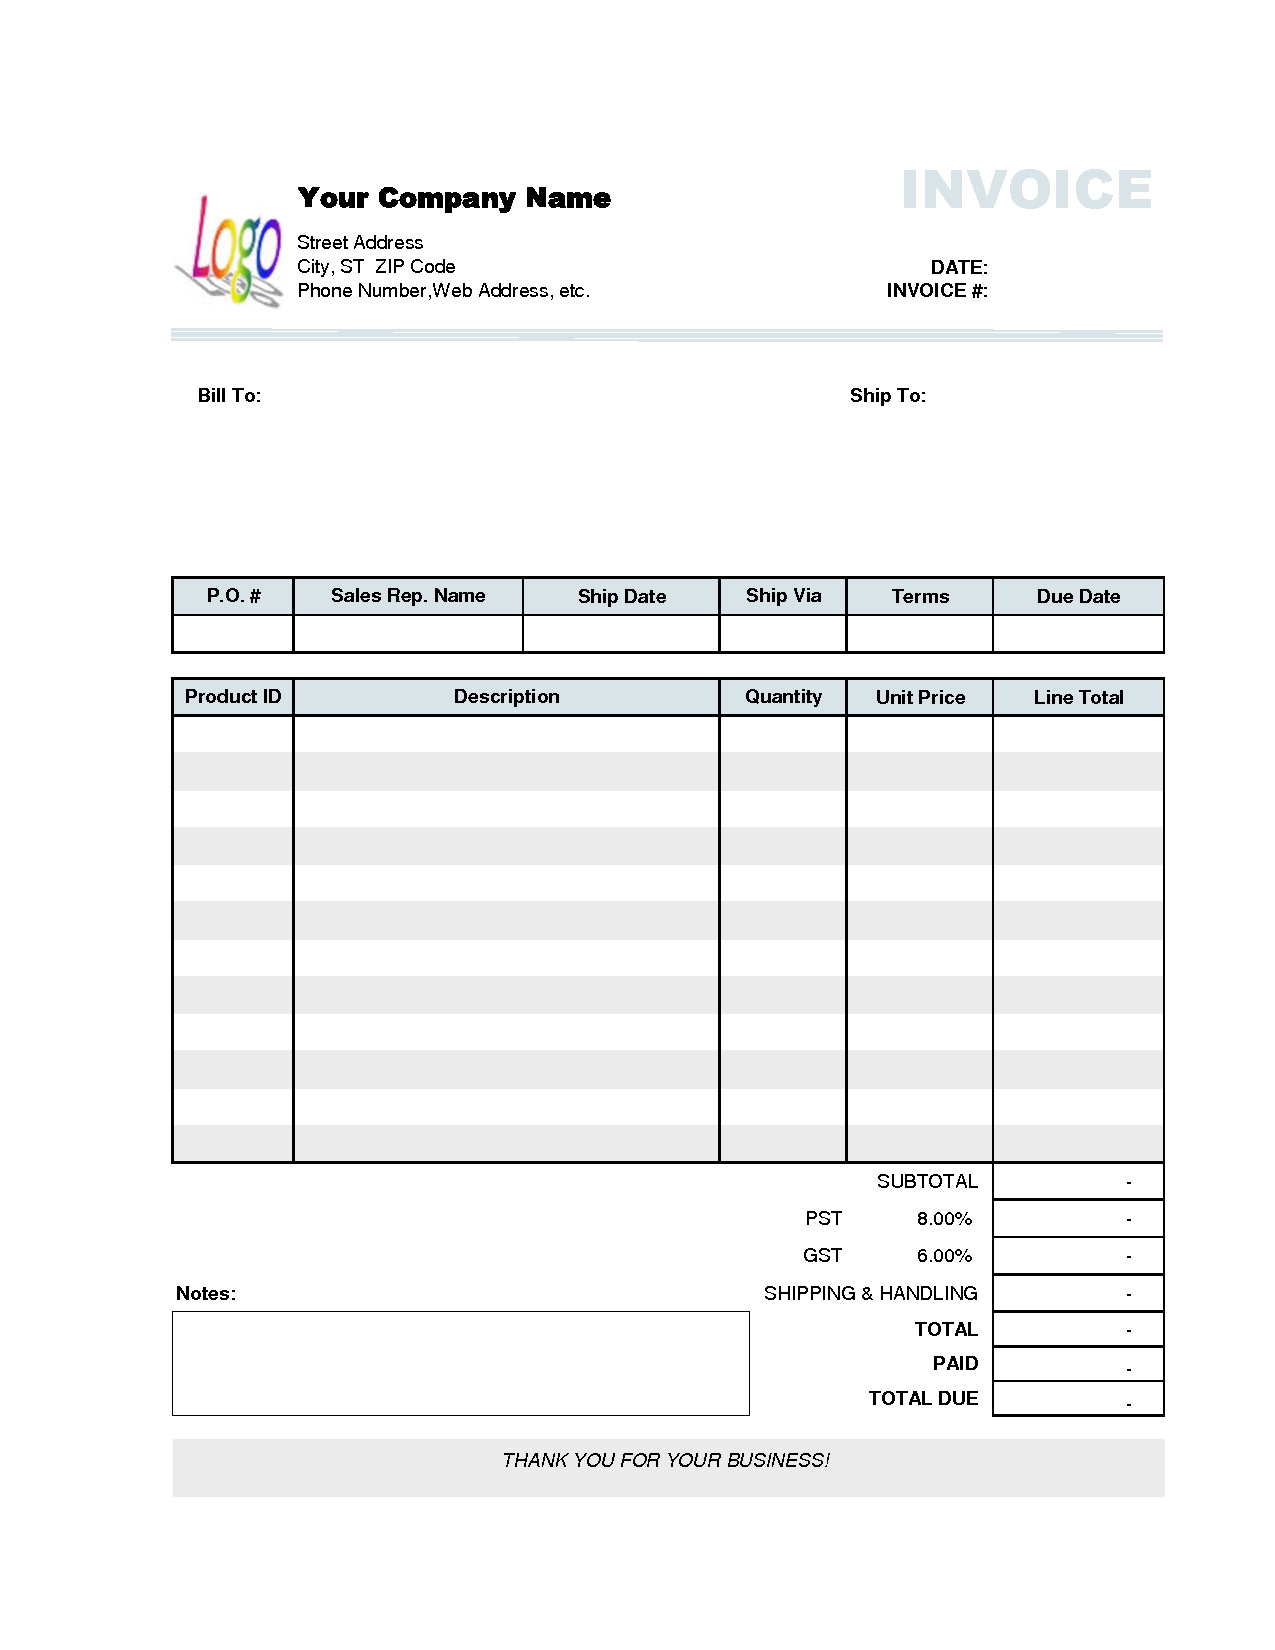 business invoices templates business invoice templates consultant general 93 0 kib 8 357 hits 1275 X 1650